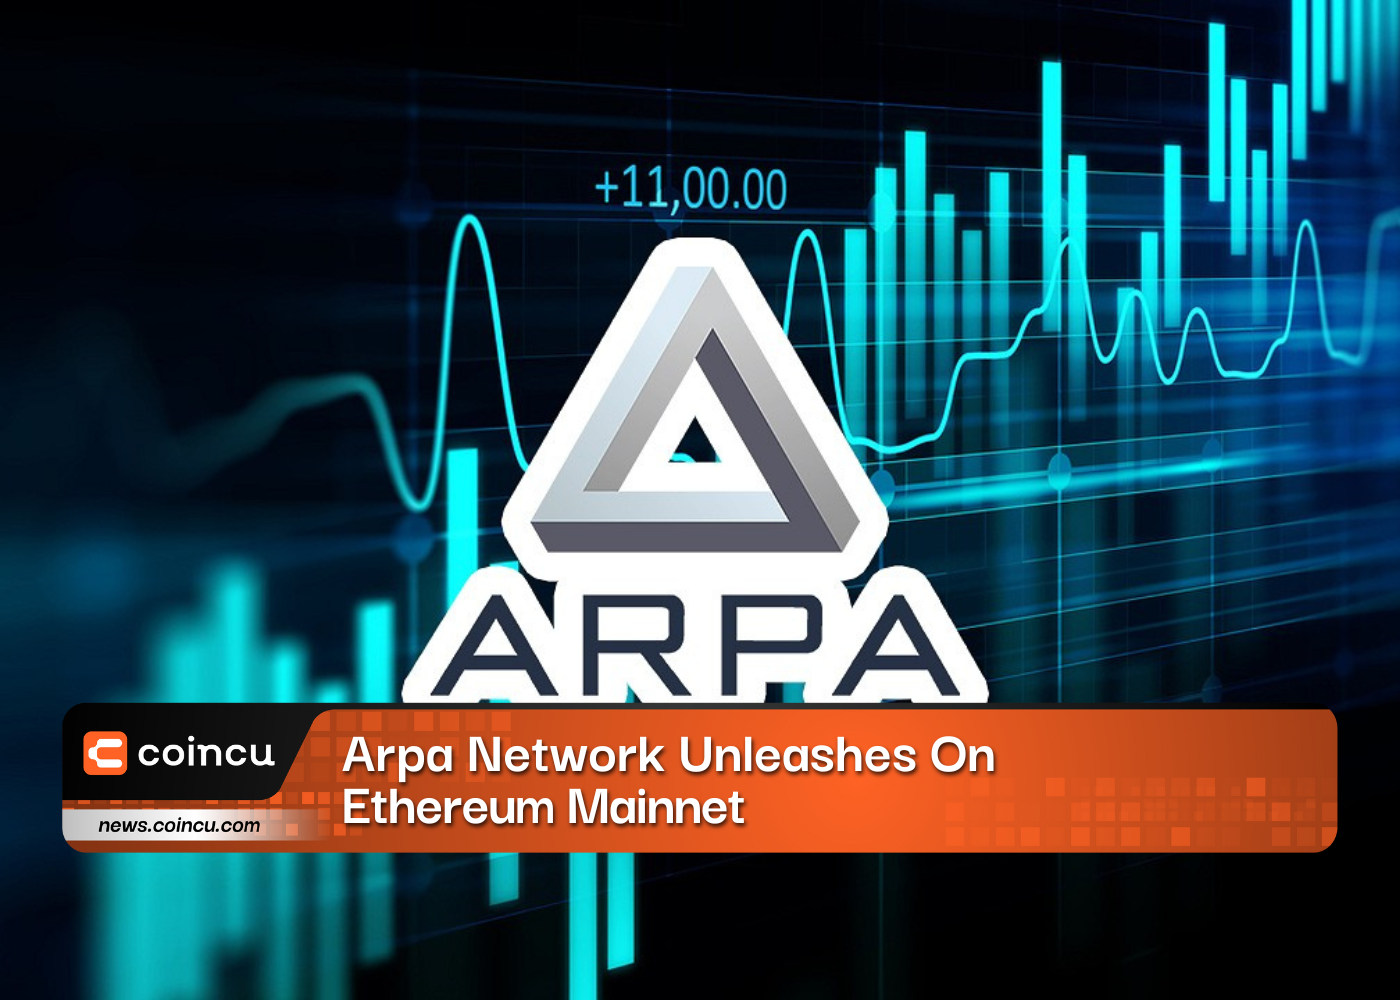 Arpa Network Unleashes On